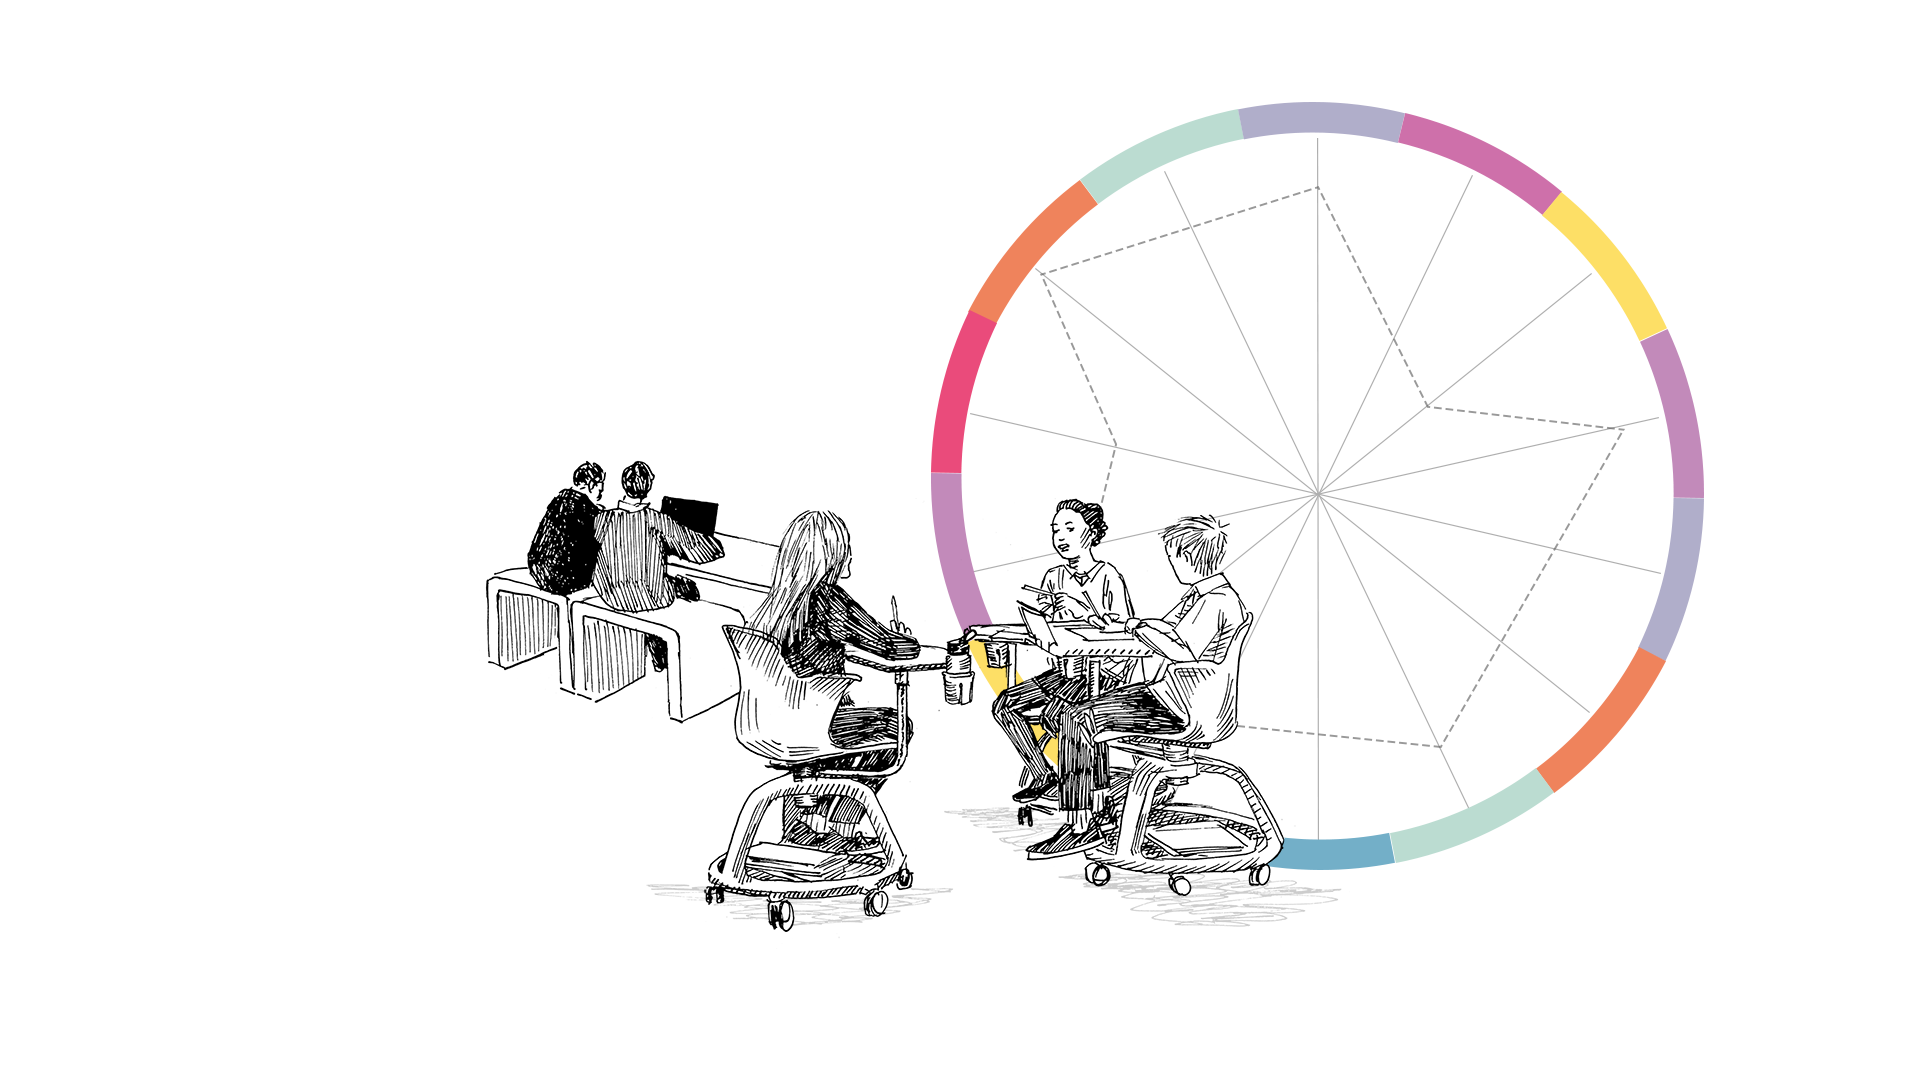 An illustration of the Place Standard wheel in the background. A group of people in the foreground - some of them are sitting in a circle and talking and some of them working on their laptops.